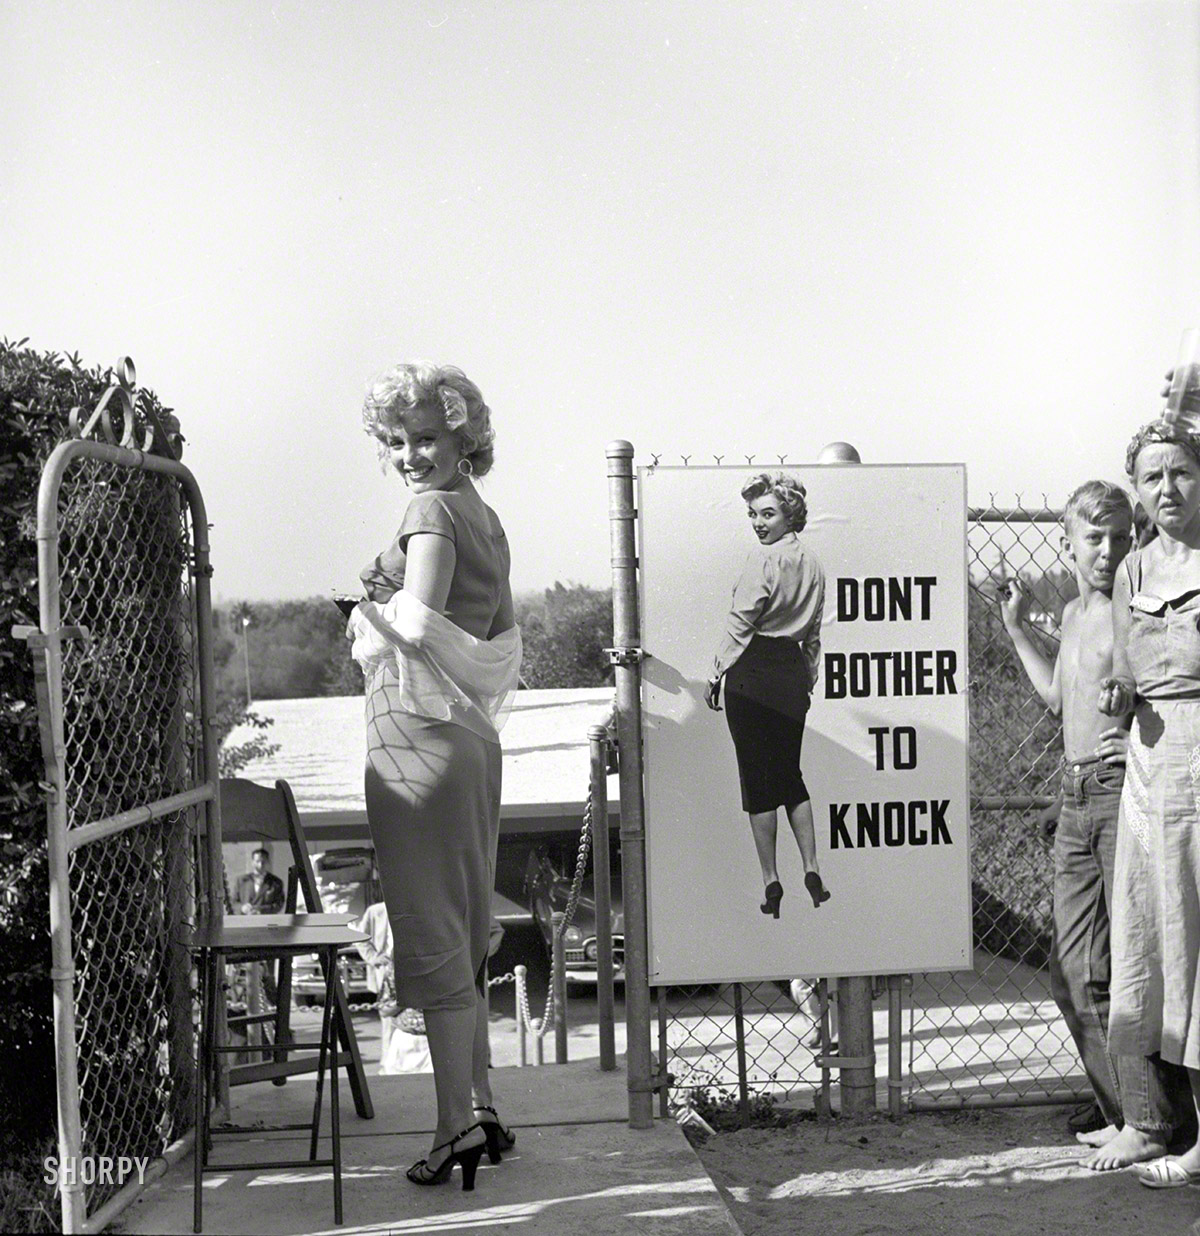 August 1952. Los Angeles. "Marilyn Monroe attending a publicity event for the film Don't Bother to Knock." Photo by Earl Theisen for Look magazine. View full size.